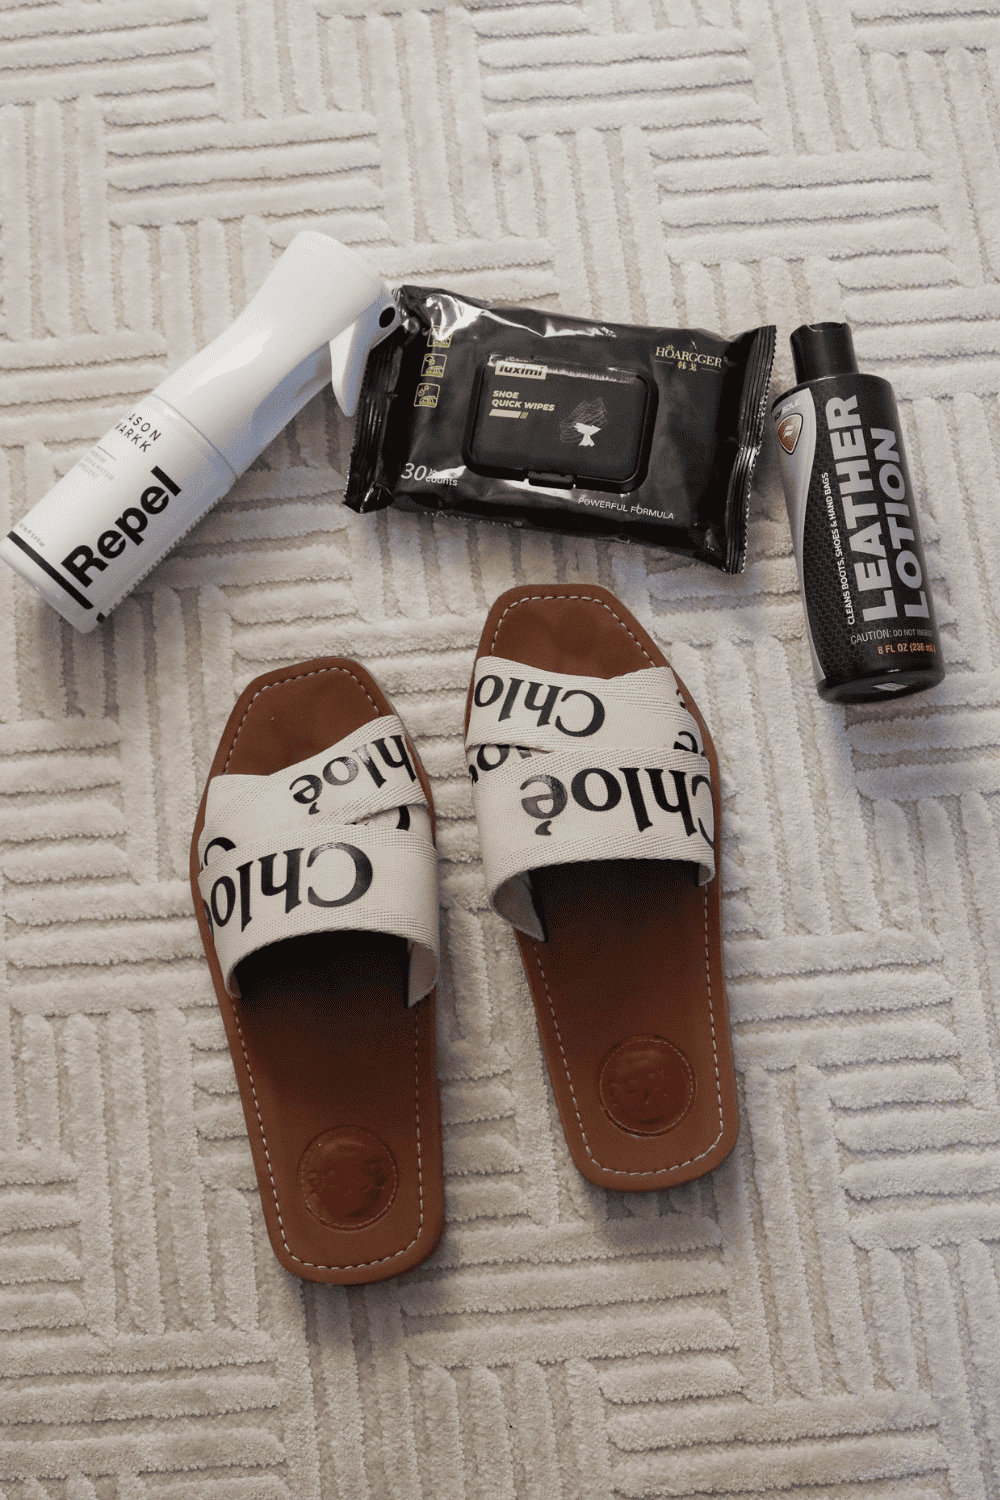 How To Clean Your Chloe Logo Slides